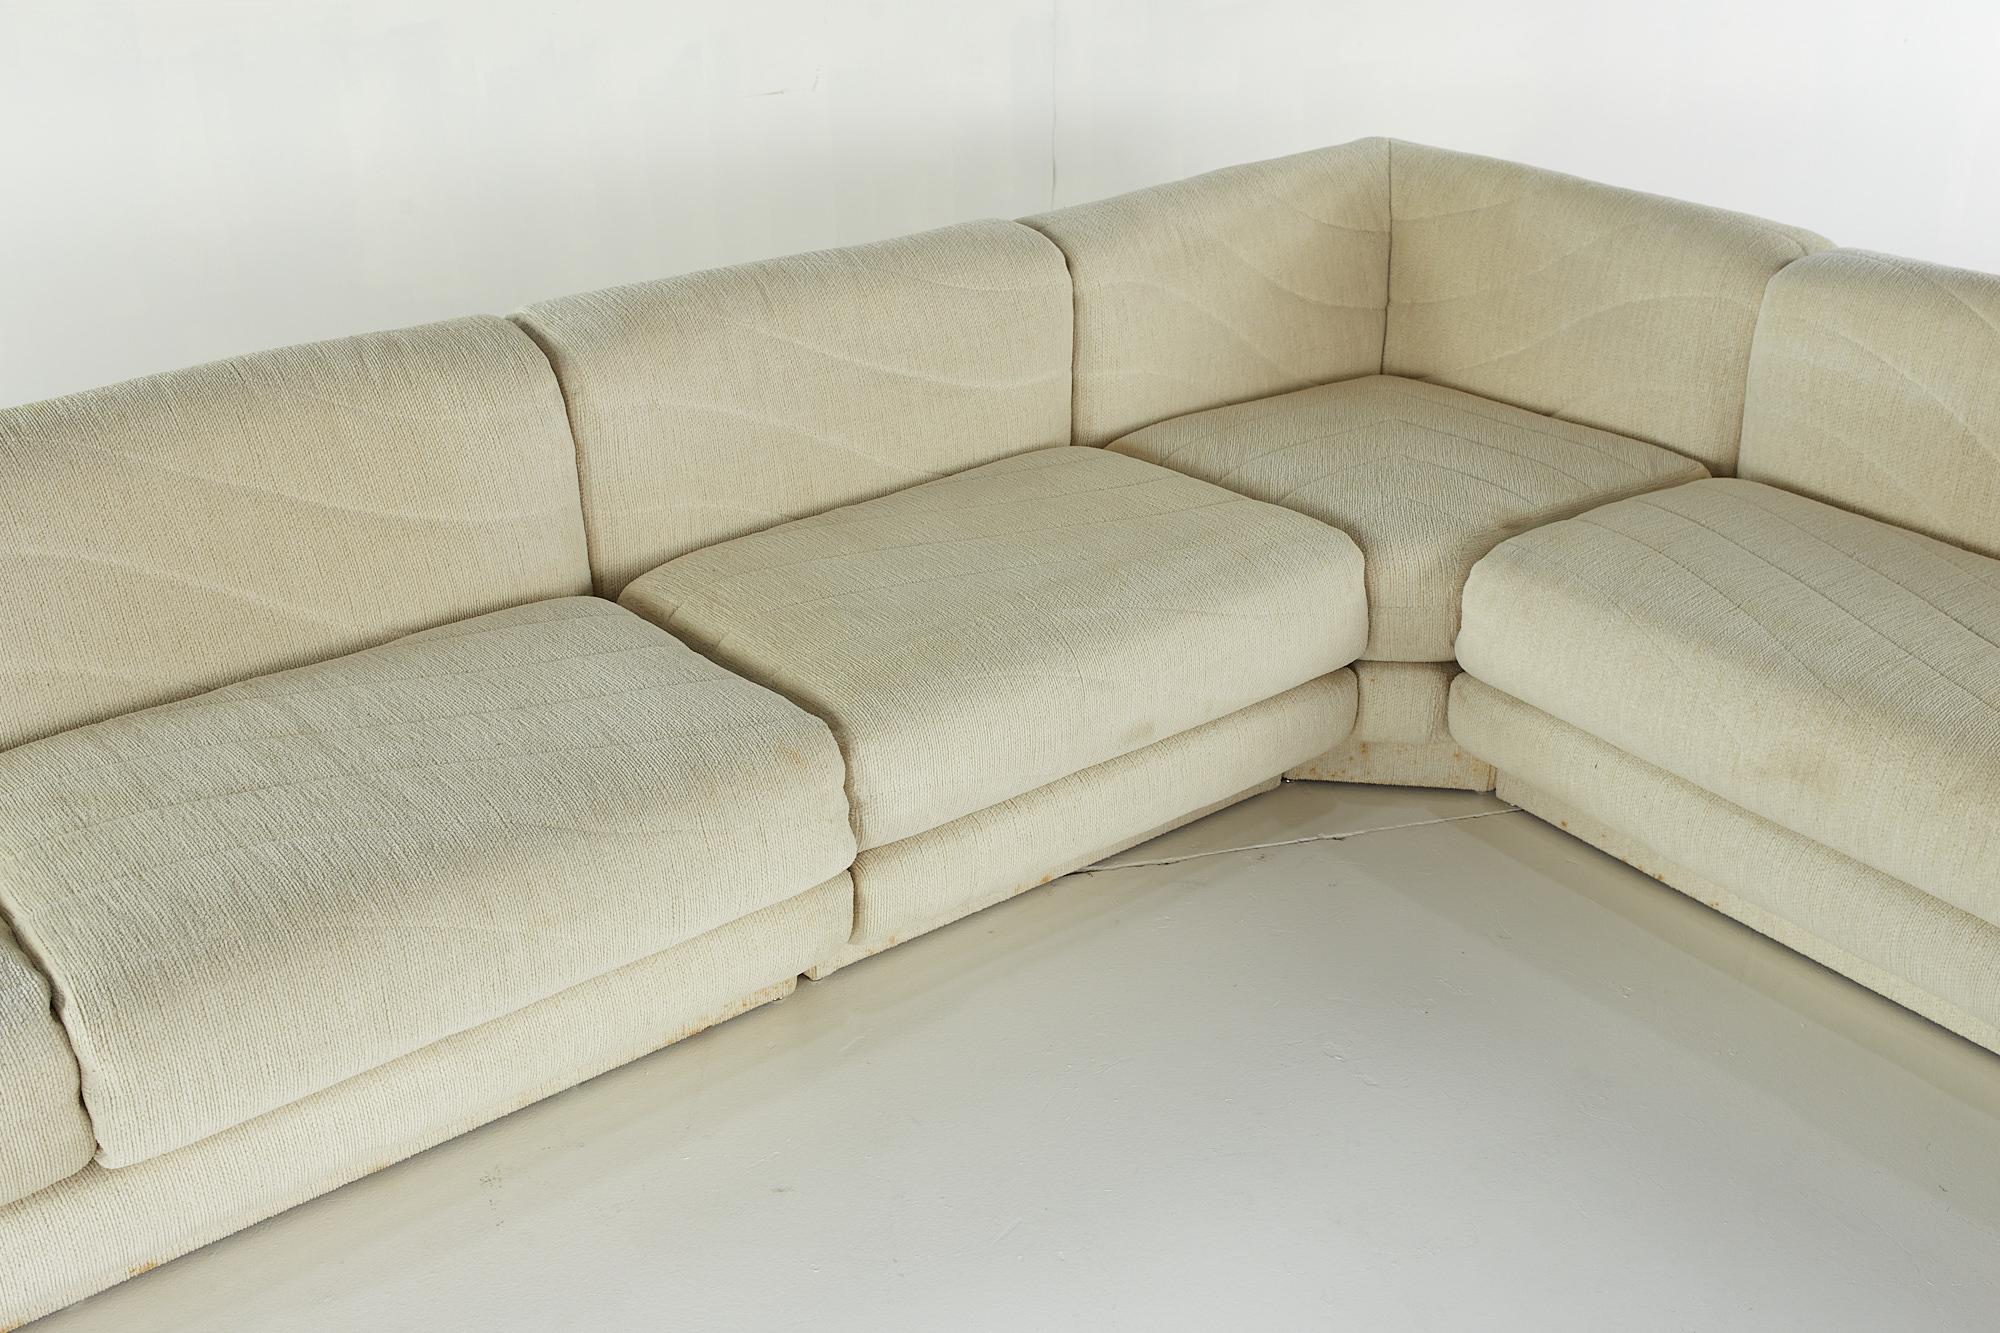 Directional Mid-Century Sectional Sofa In Good Condition For Sale In Countryside, IL